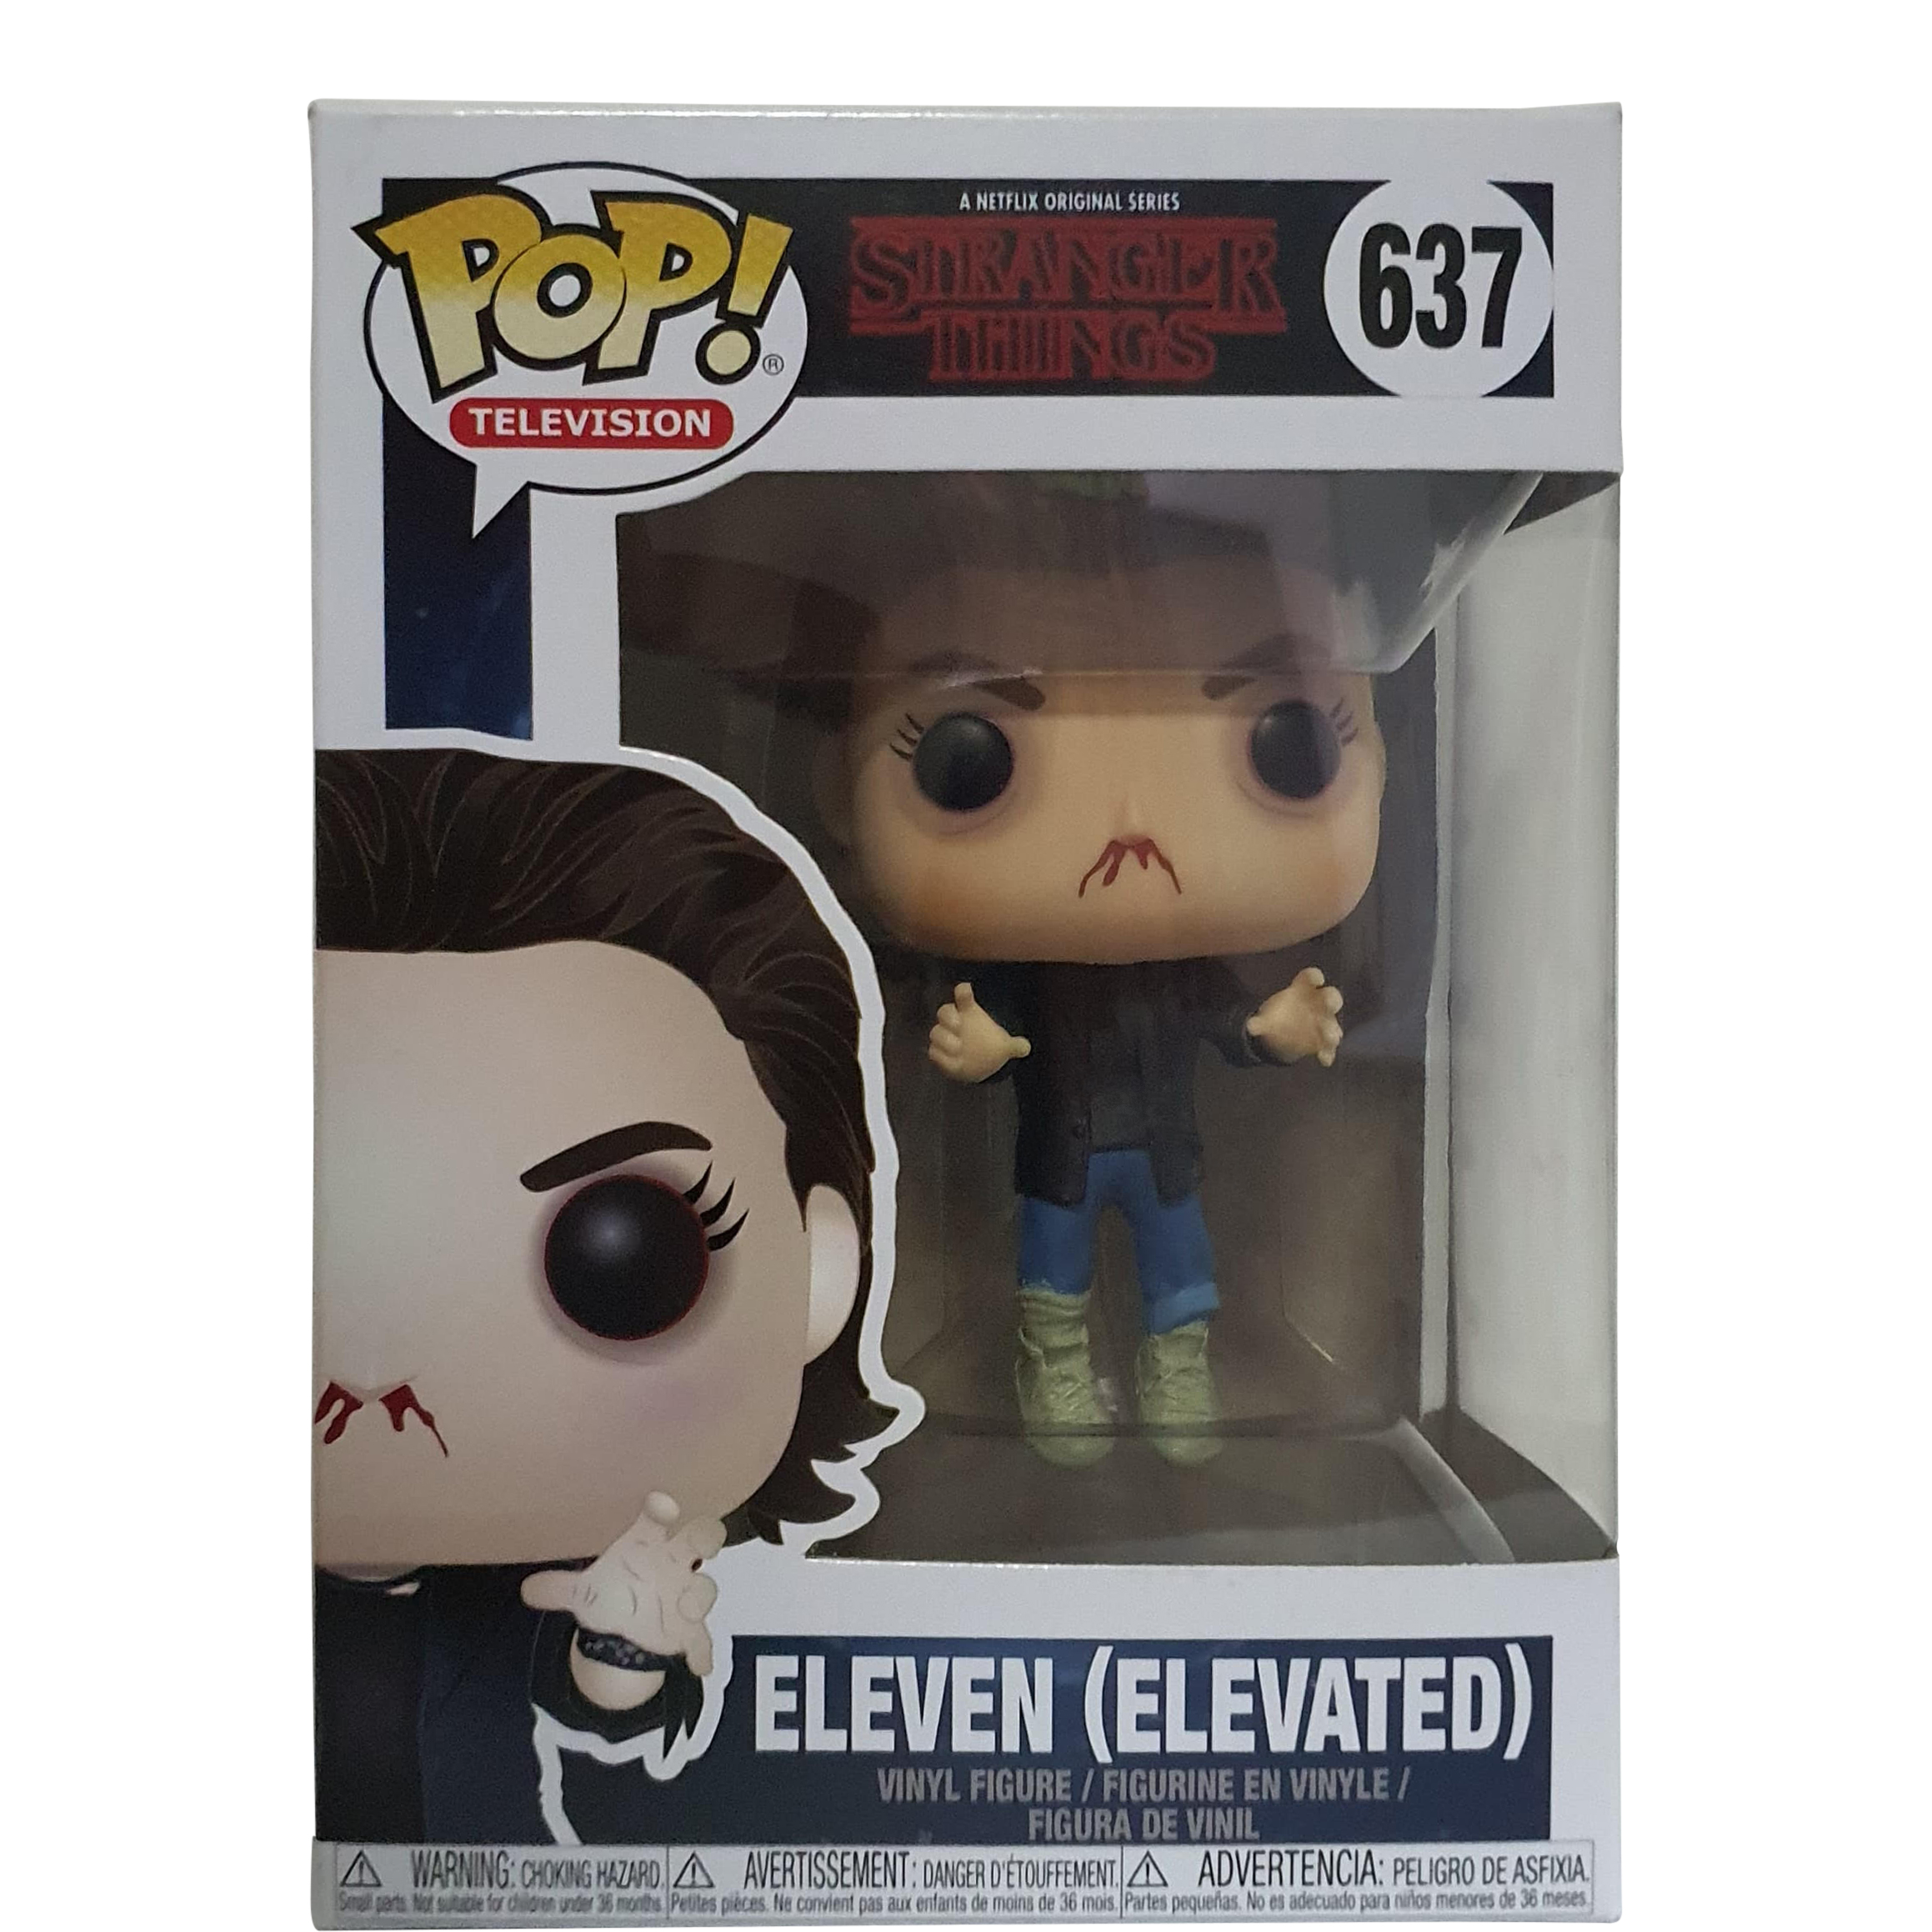 Funko Pop! Television Stranger Things Eleven (Elevated) Figure 